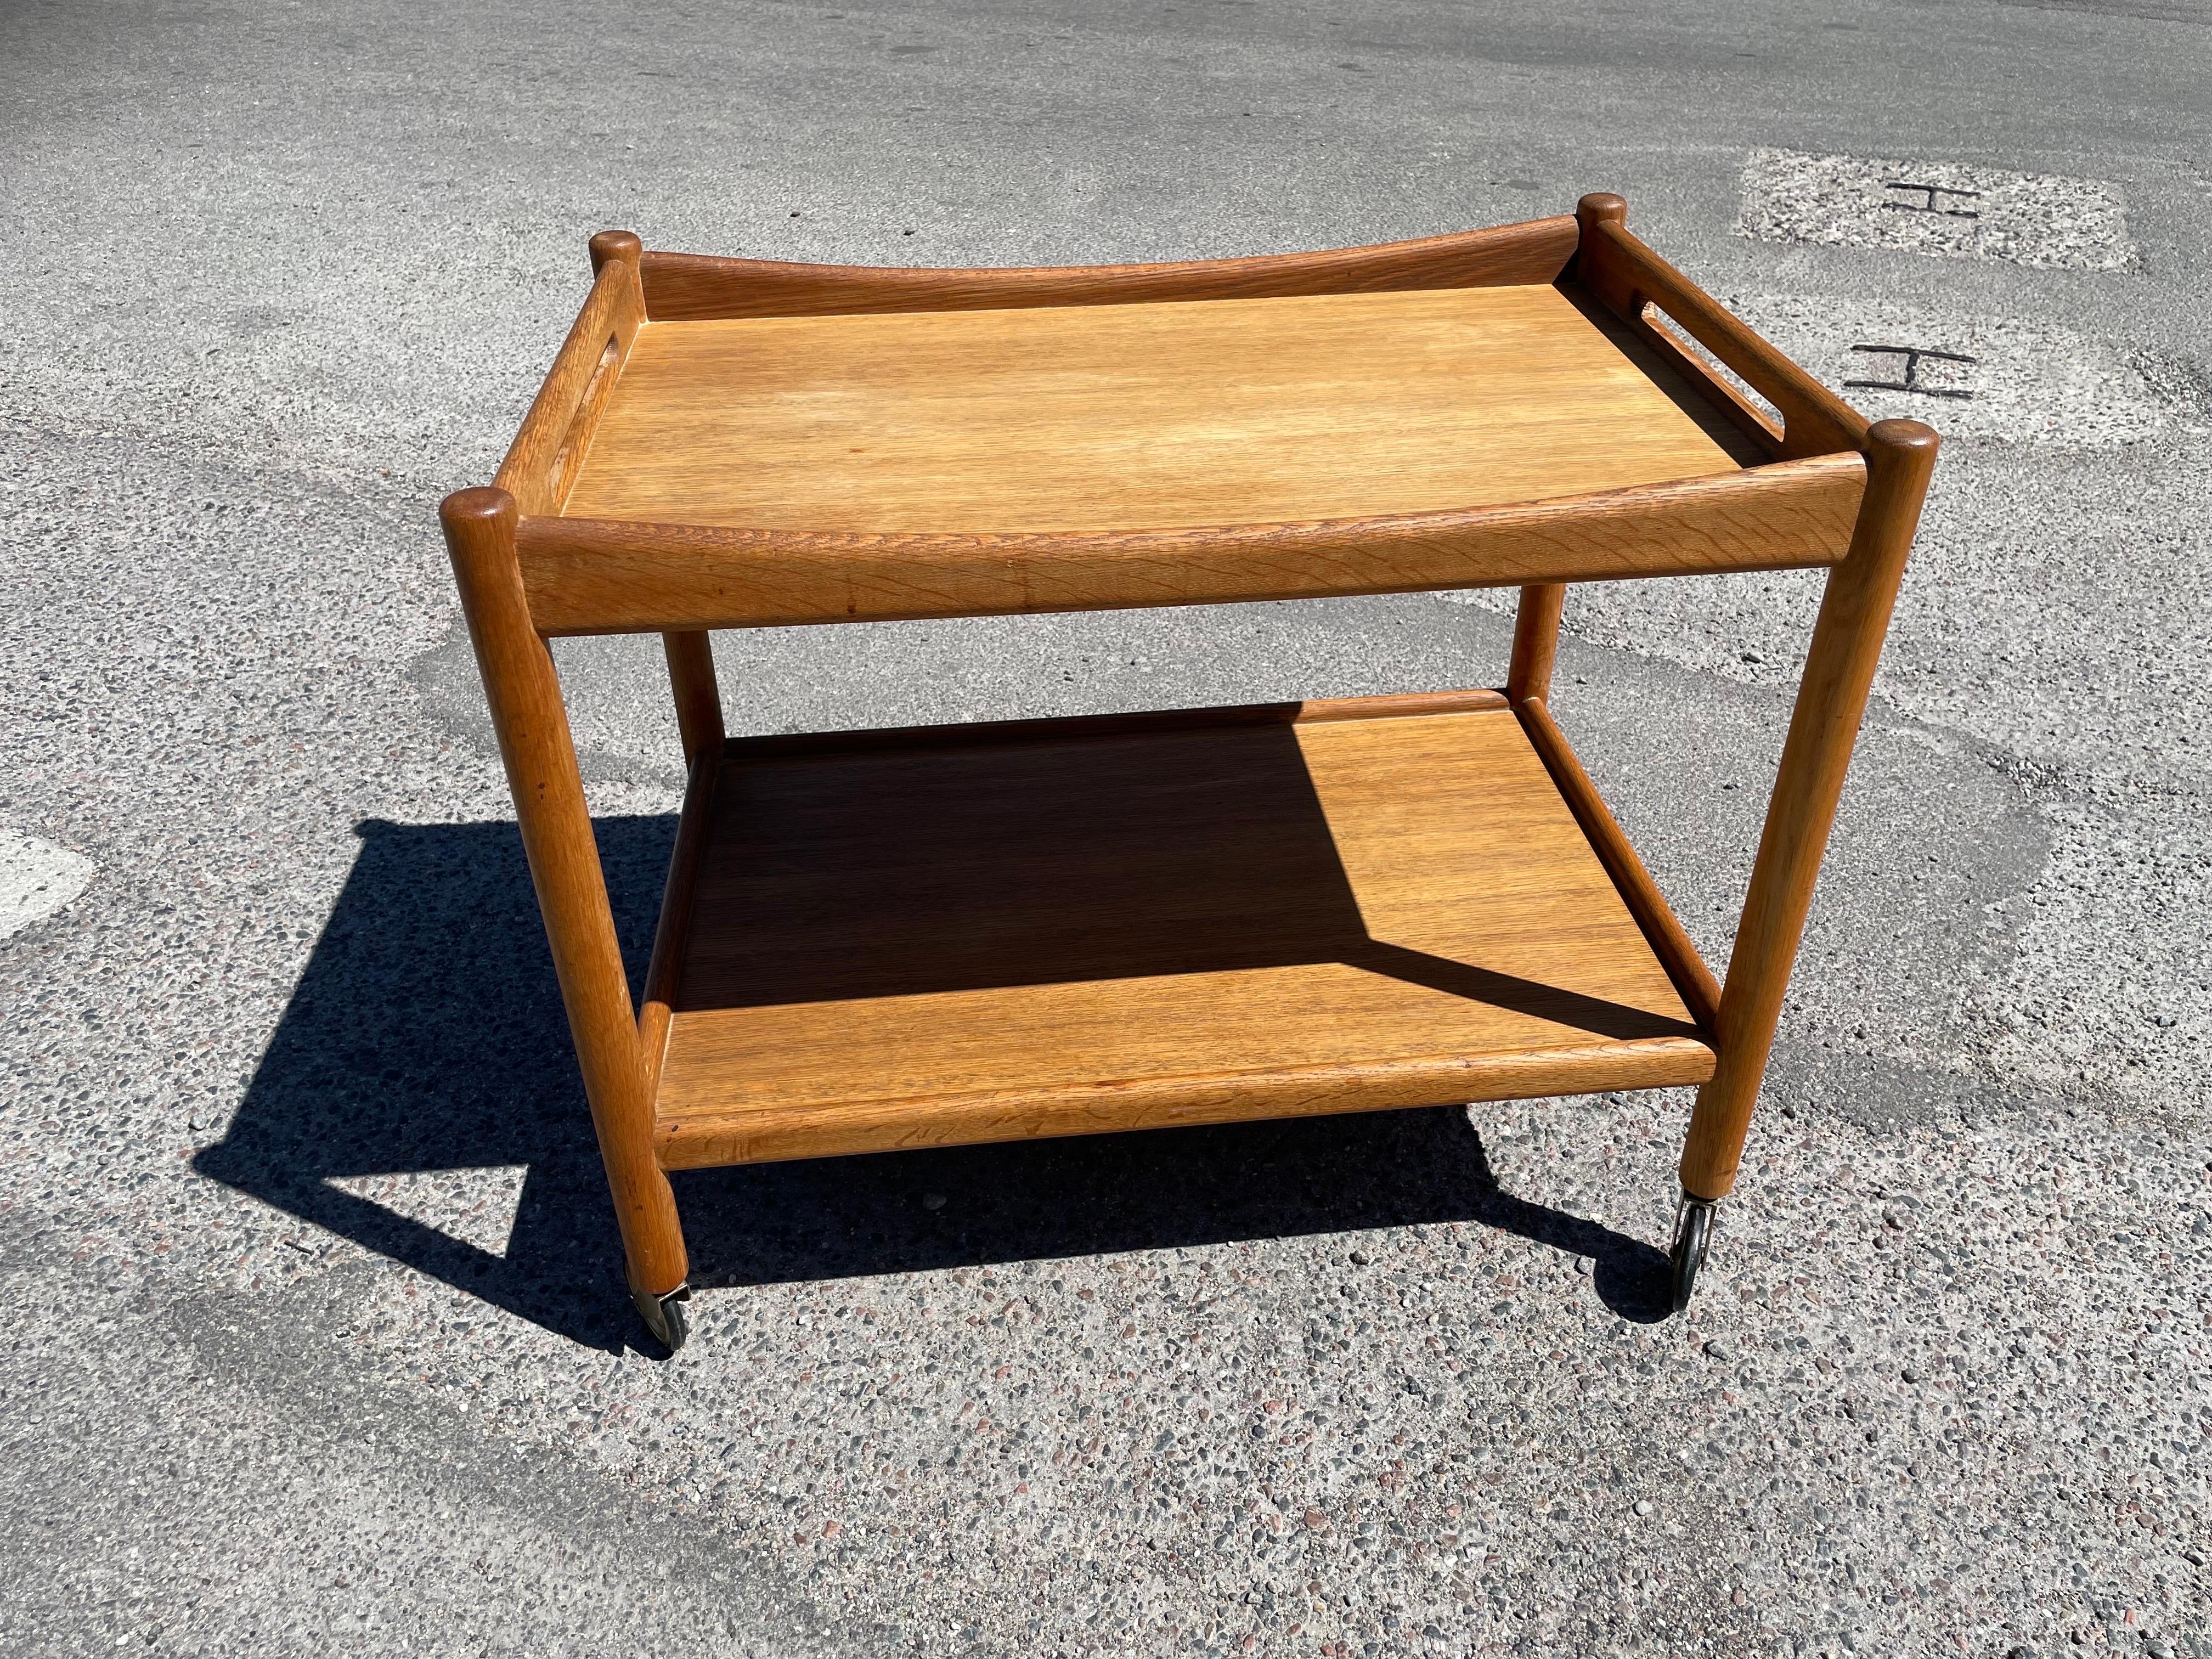 A stunning serving trolley designed by the legendary Hans Wegner for Andreas Tuck in 1959. Crafted from solid oak, this piece exudes both beauty and functionality. Despite its age, it remains in remarkable condition, with only minor traces of use as